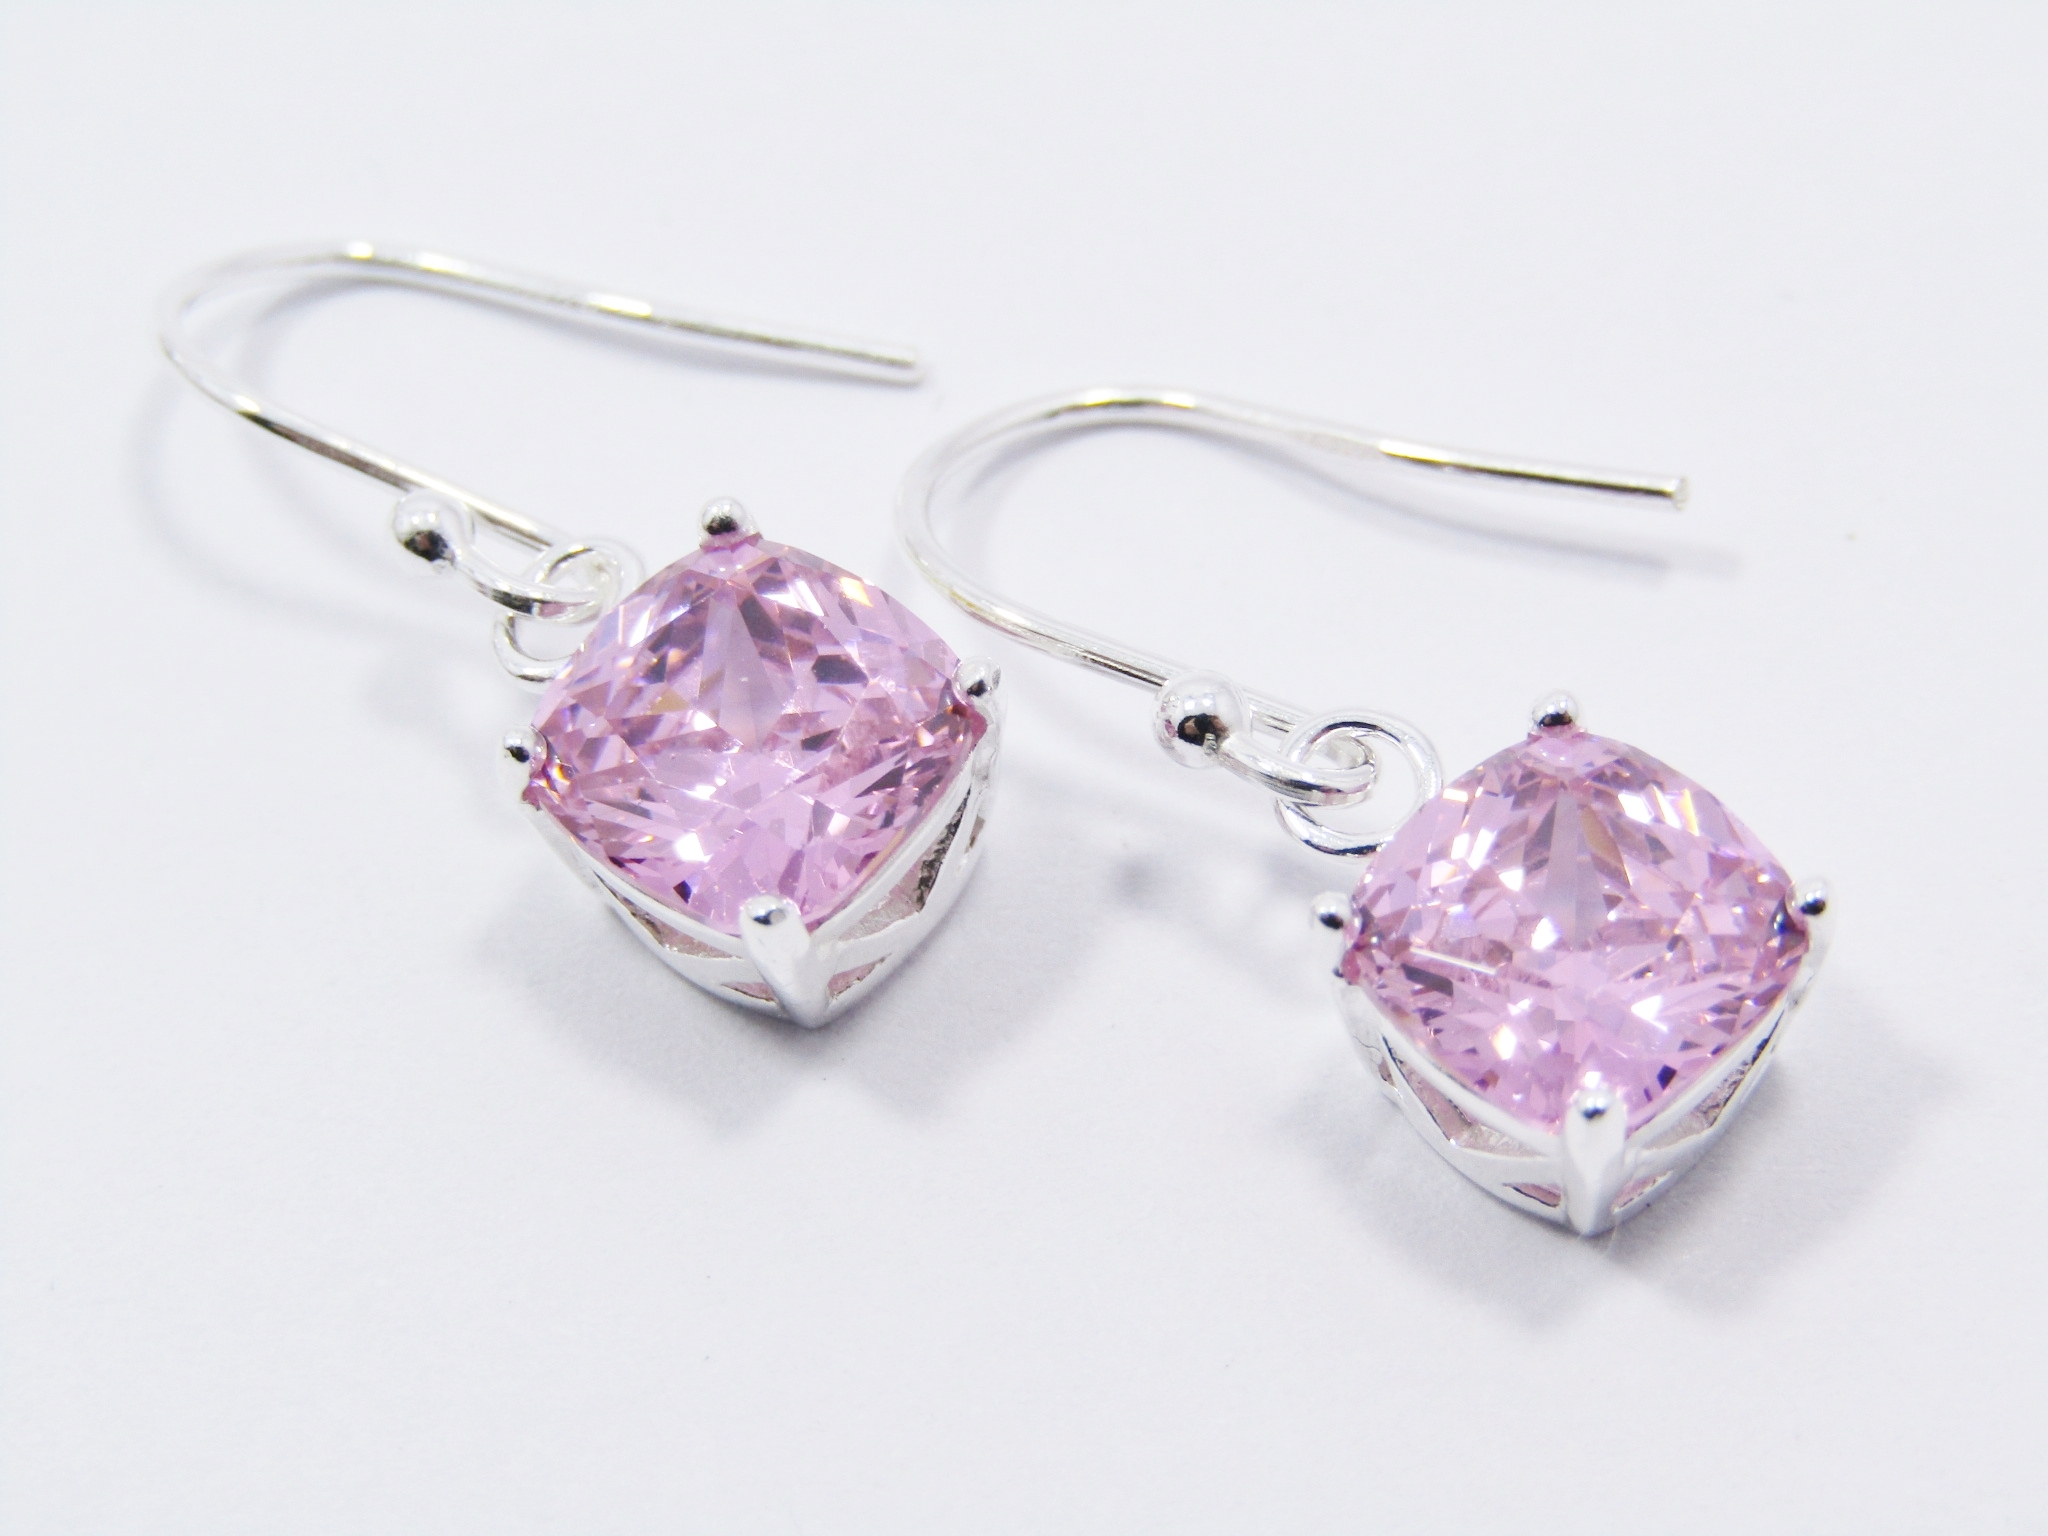 A Lovely Pair of Pink Zirconia Dangling Earrings in Sterling Silver.